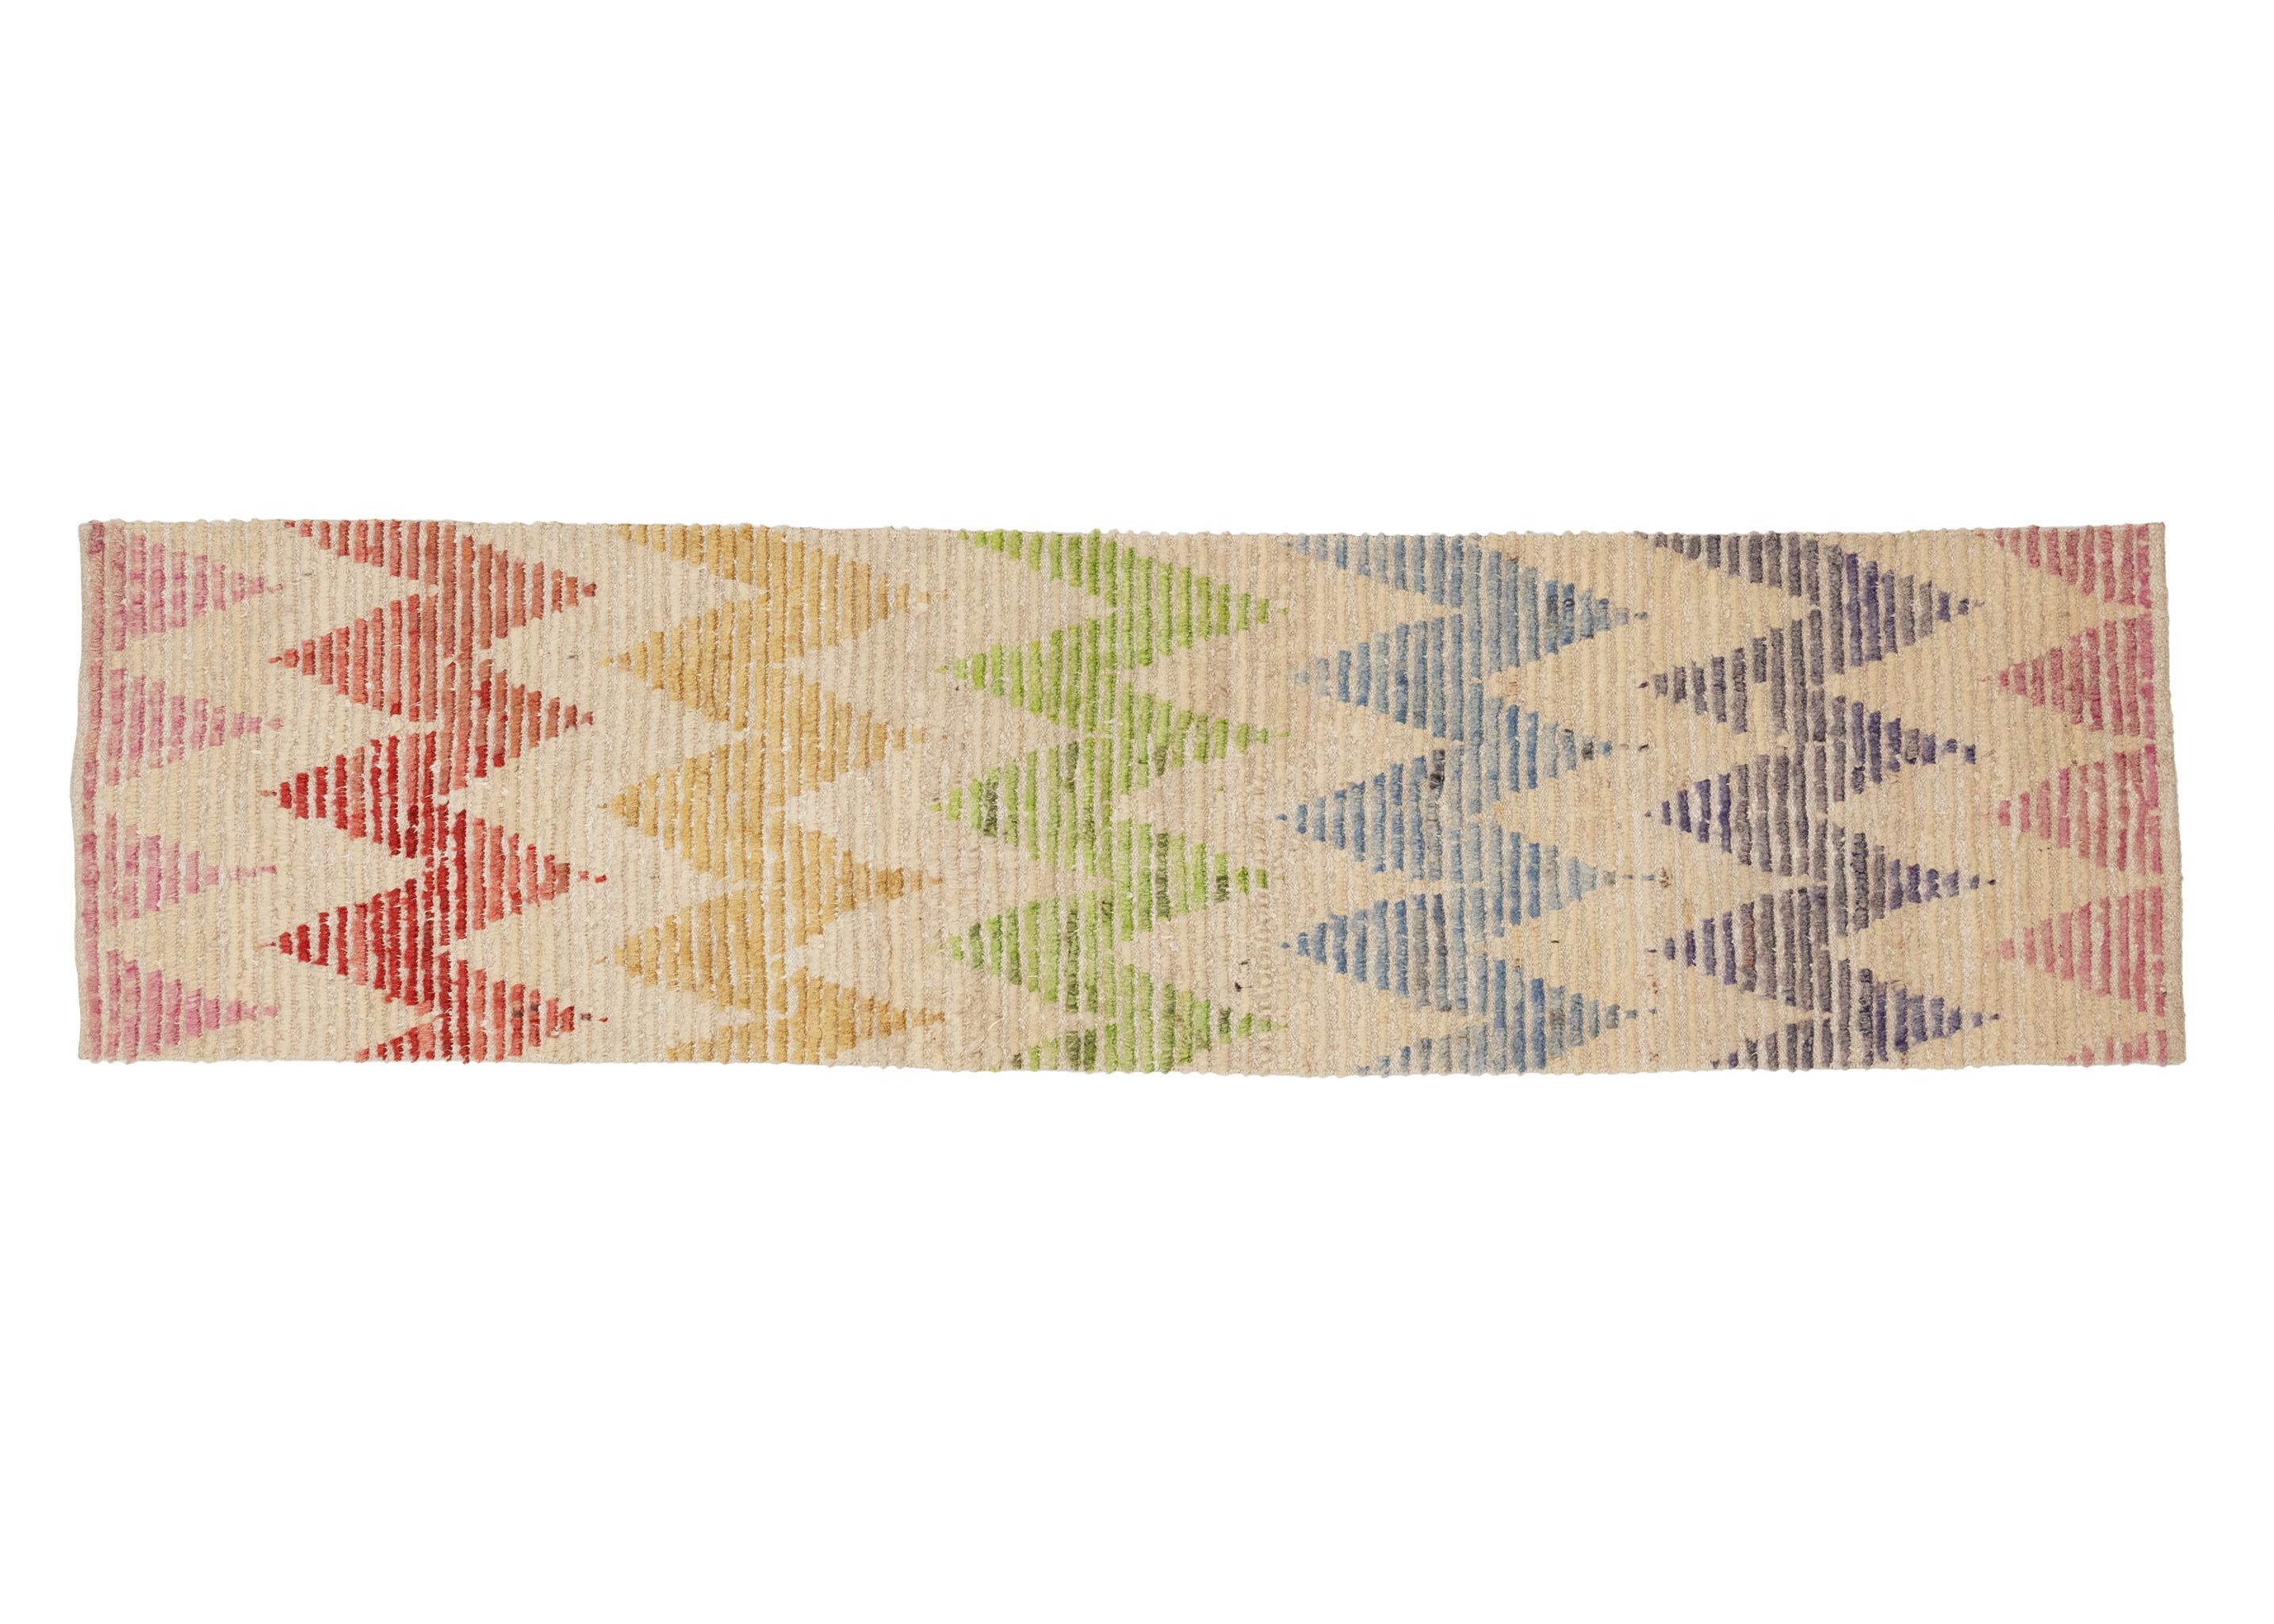 Introducing a stunning vintage Turkish rug from the 1950s, this captivating piece features a mesmerizing zigzag pattern in a rainbow of colors. Bursting with retro charm, this rug is sure to add a lively and cheerful touch to any space.

The zigzag